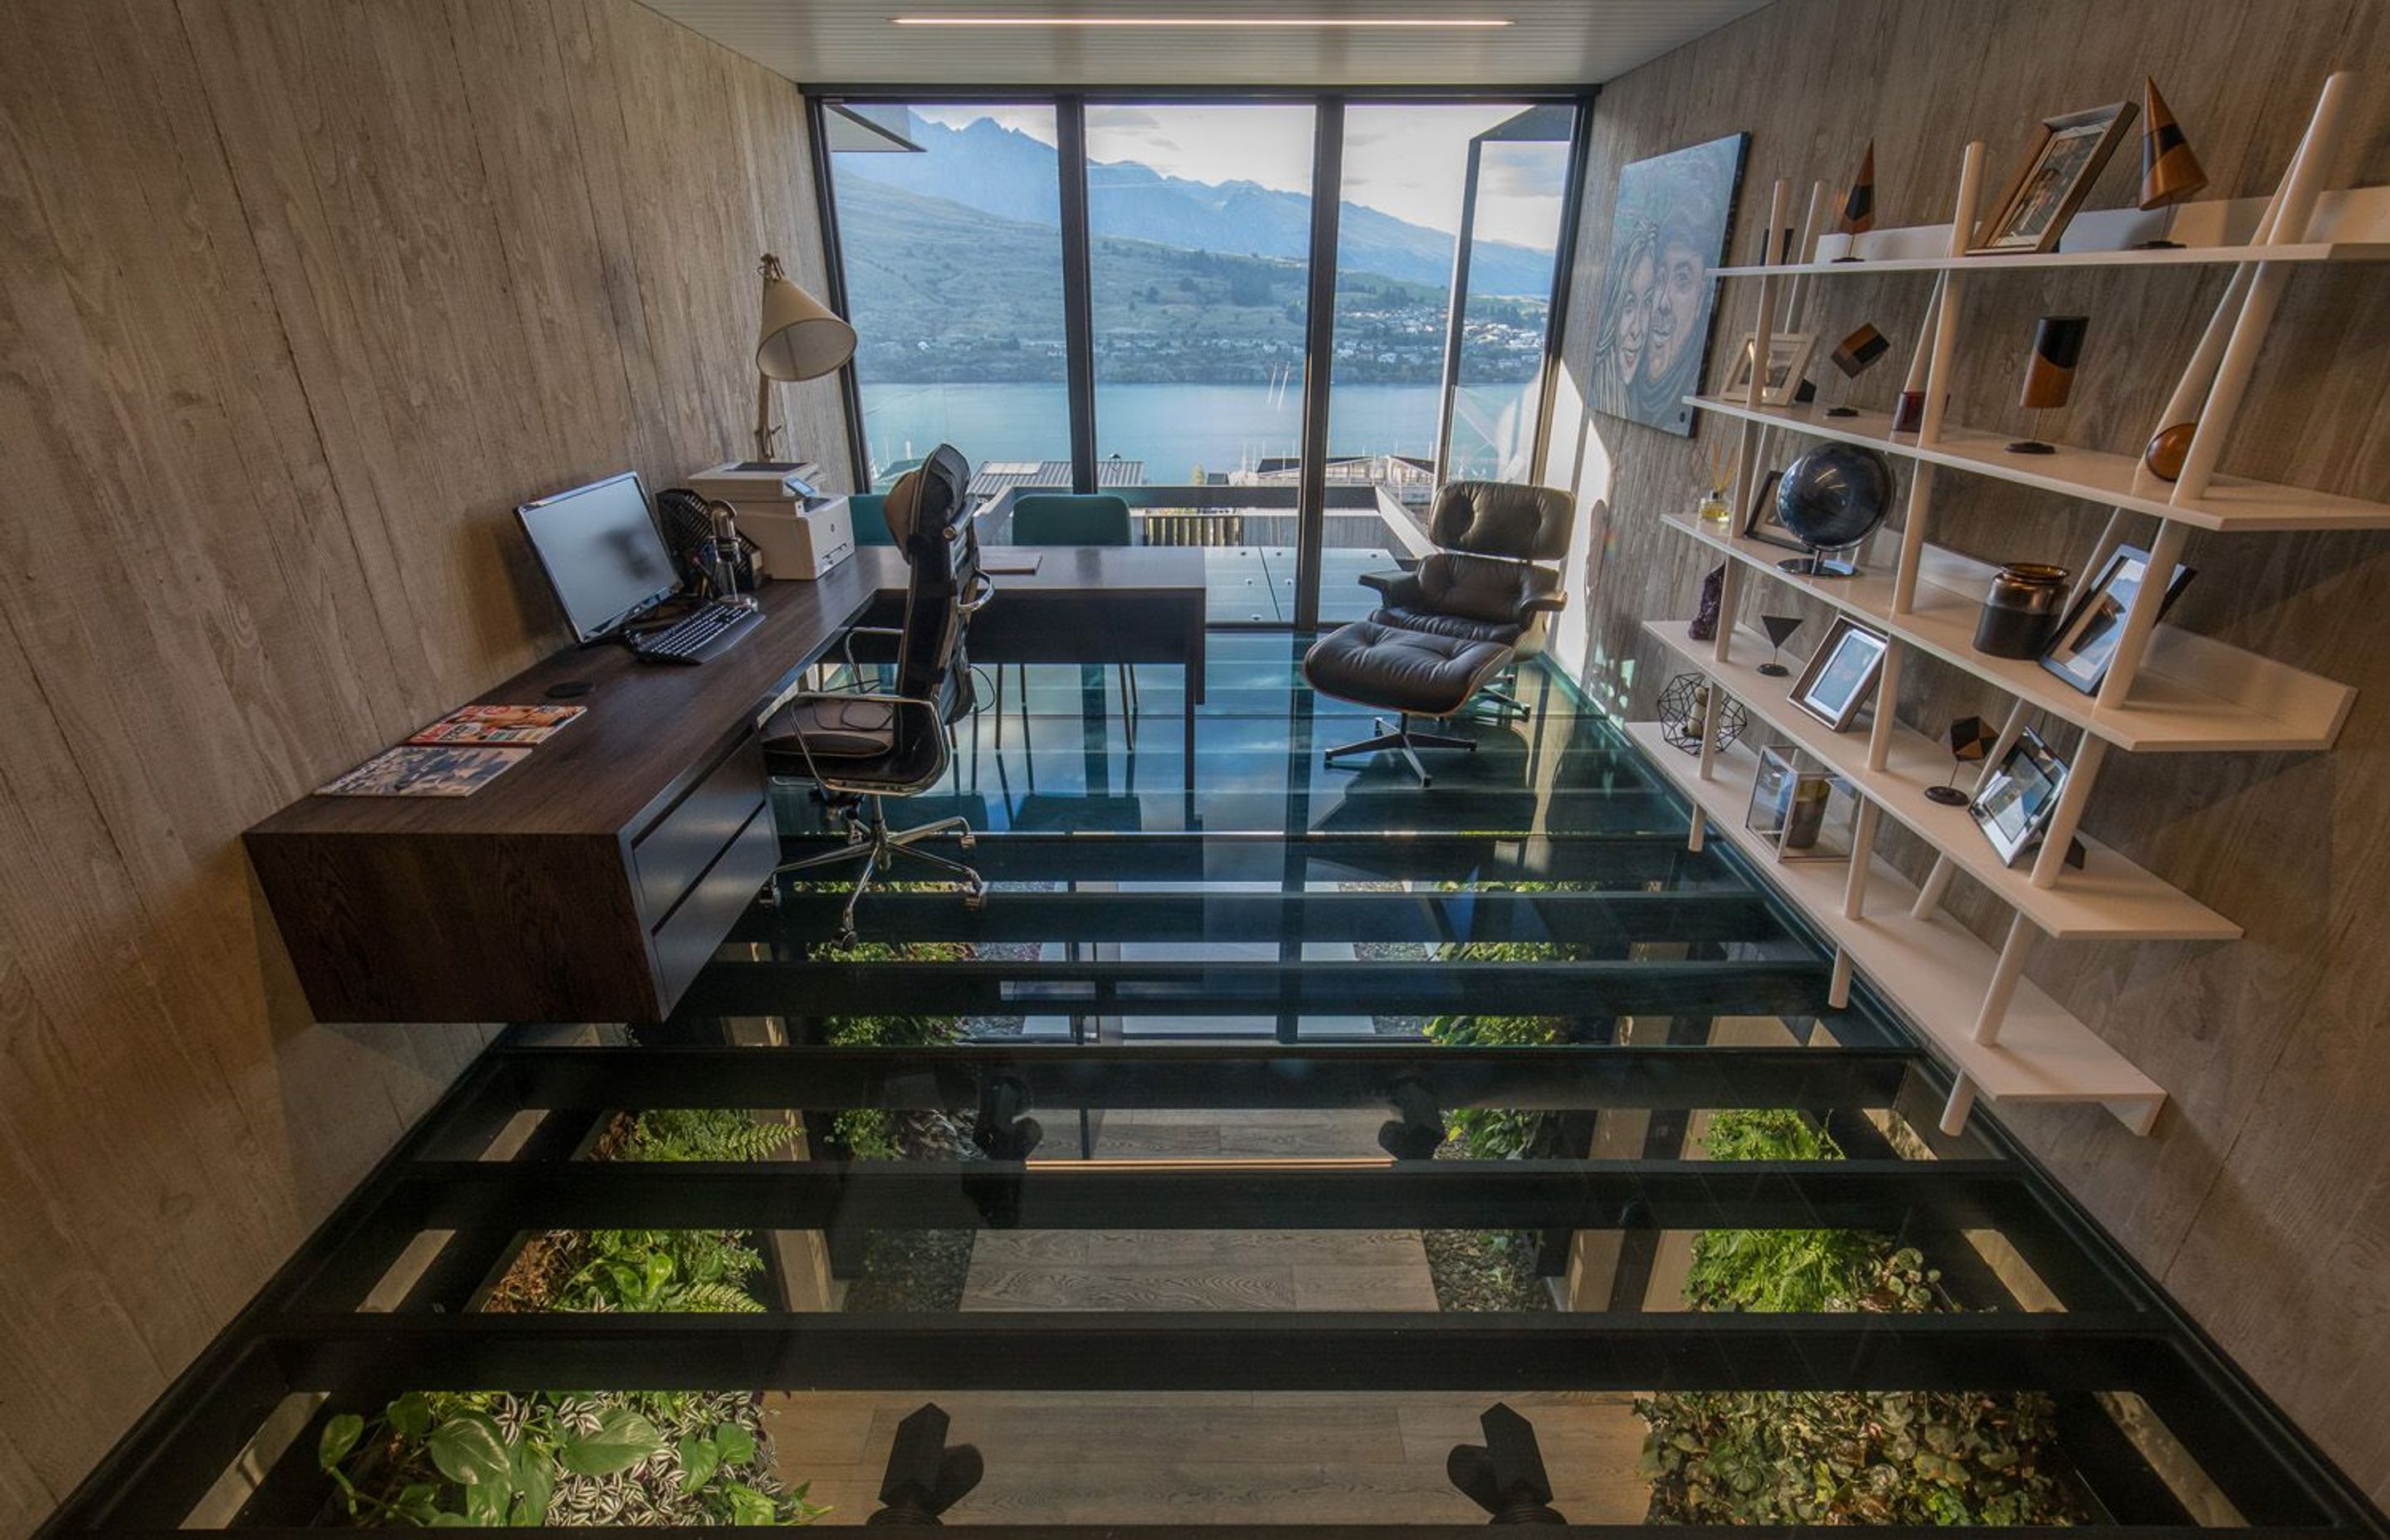 The glass floor of the office looks down into the entrance foyer, while floor-to-ceiling windows look out over the lake and mountains, framed by shuttered concrete walls.